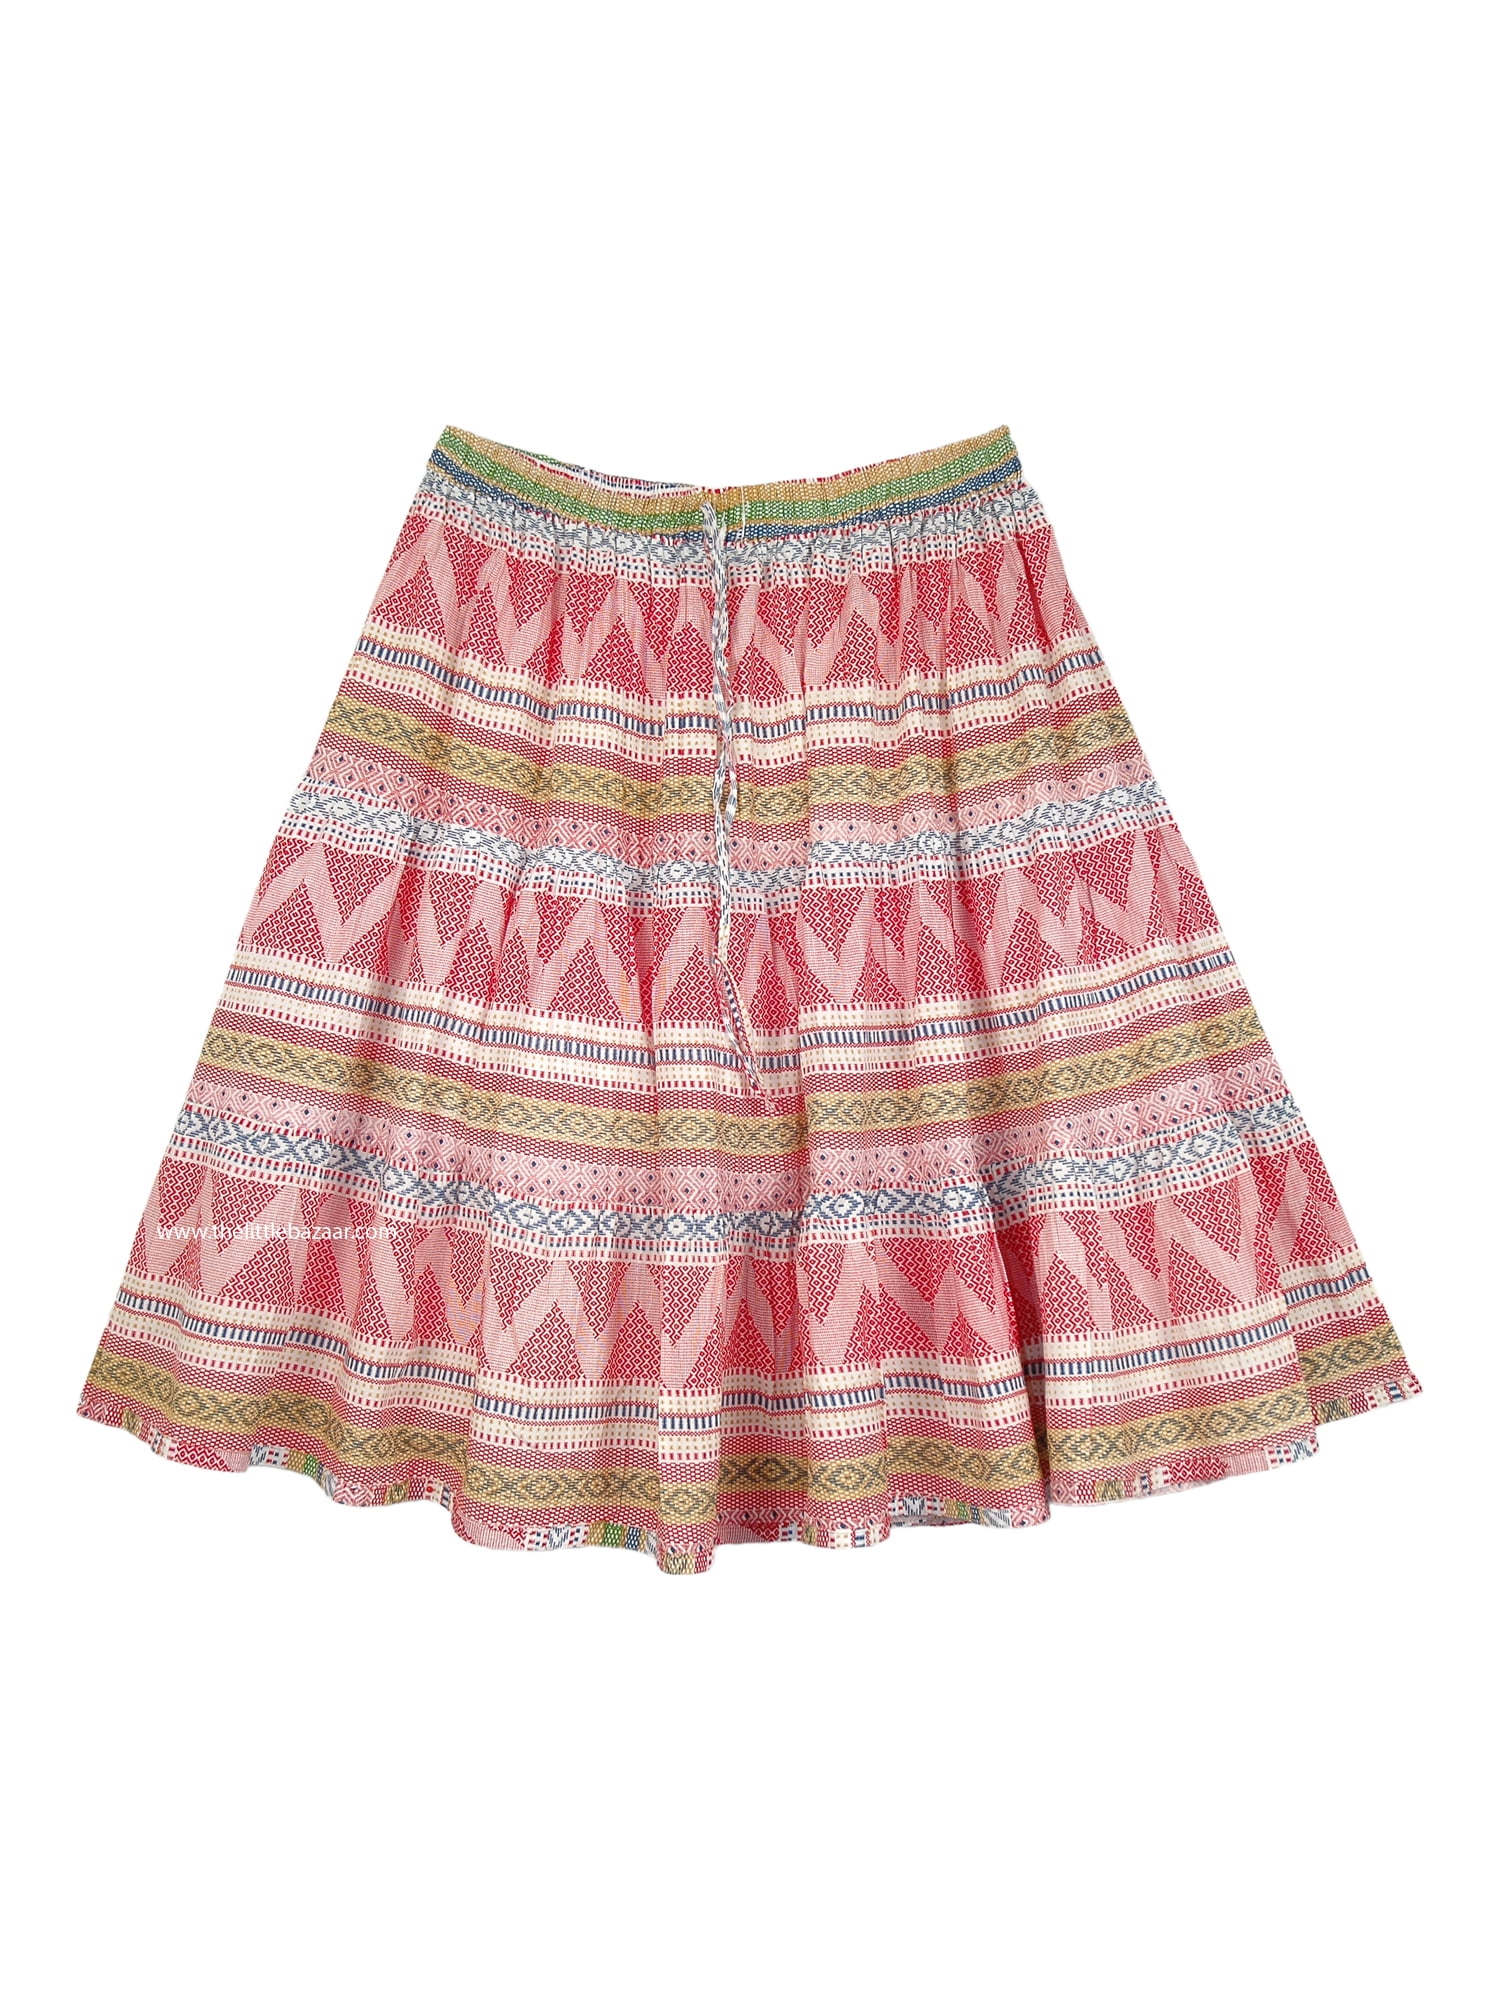 Short Full Cotton Skirt in a Hippie Red Print Lined Elastic Waist ...